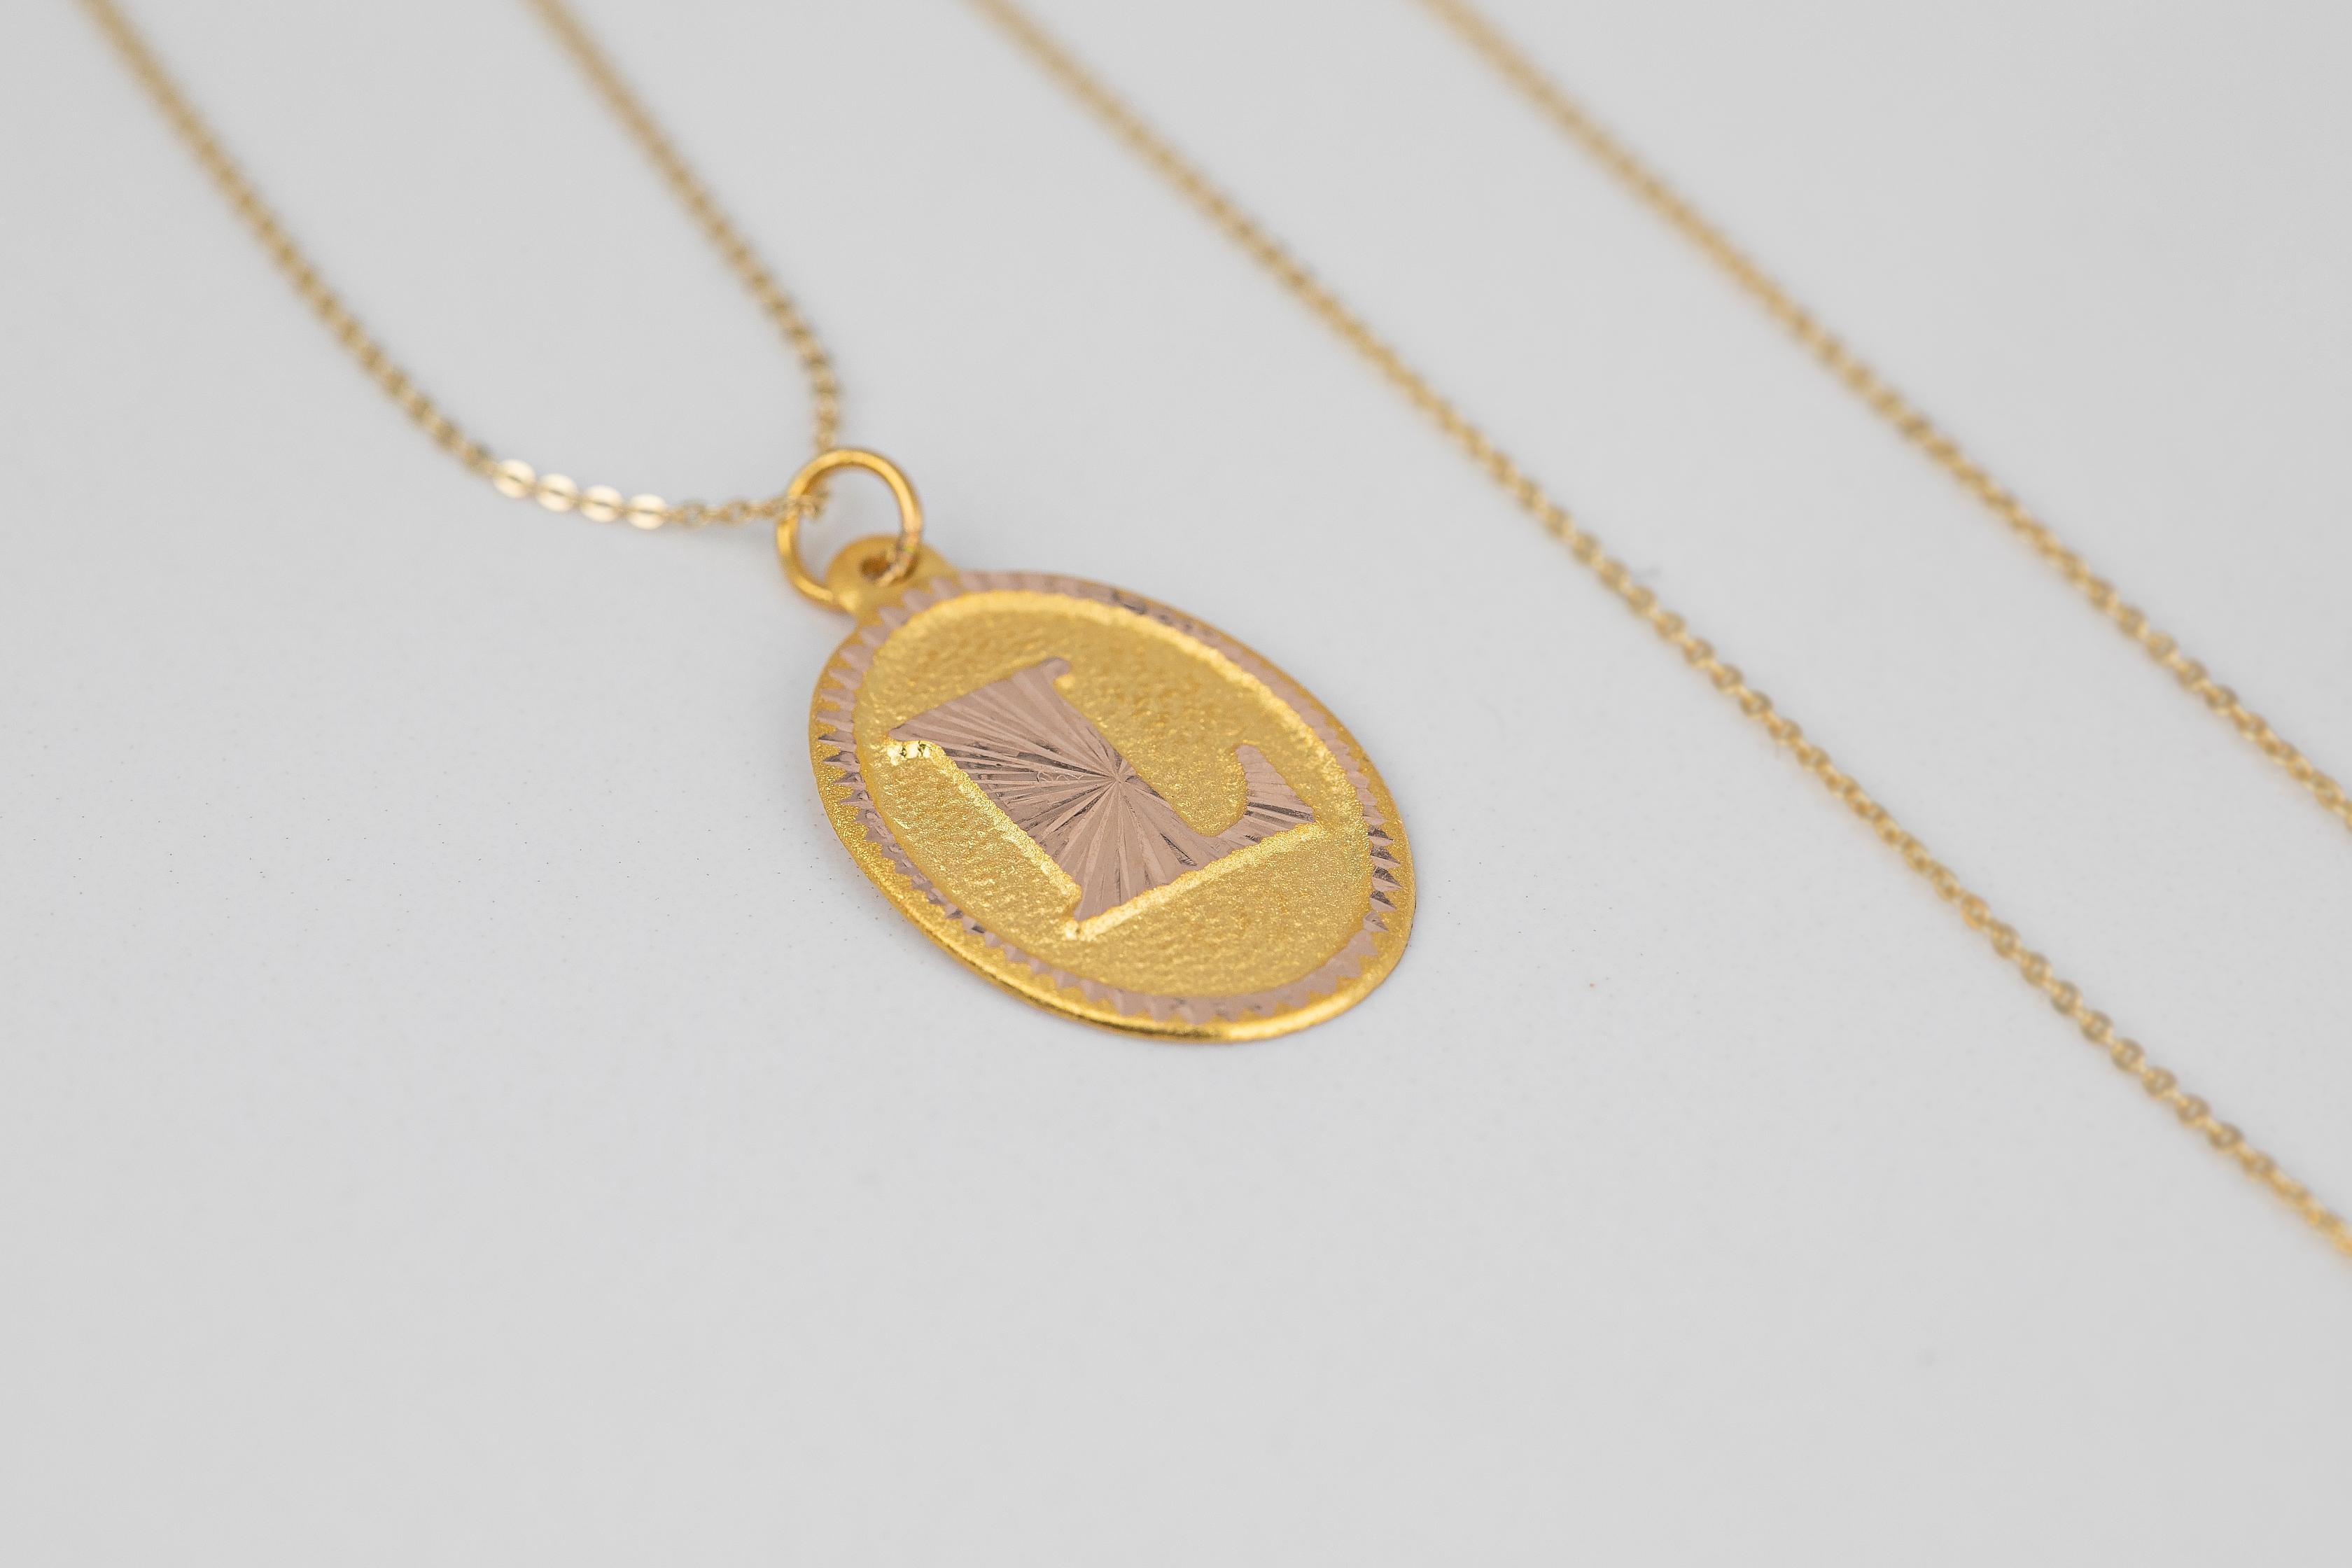 14K Gold Necklaces, Letter Necklace Models, Letter L Gold Necklace-Gift Necklace Models, Daily Necklaces, Letter Jewelry

It's a manual labor product. 'Handmade'. Fashionable product.

This necklace was made with quality materials and excellent